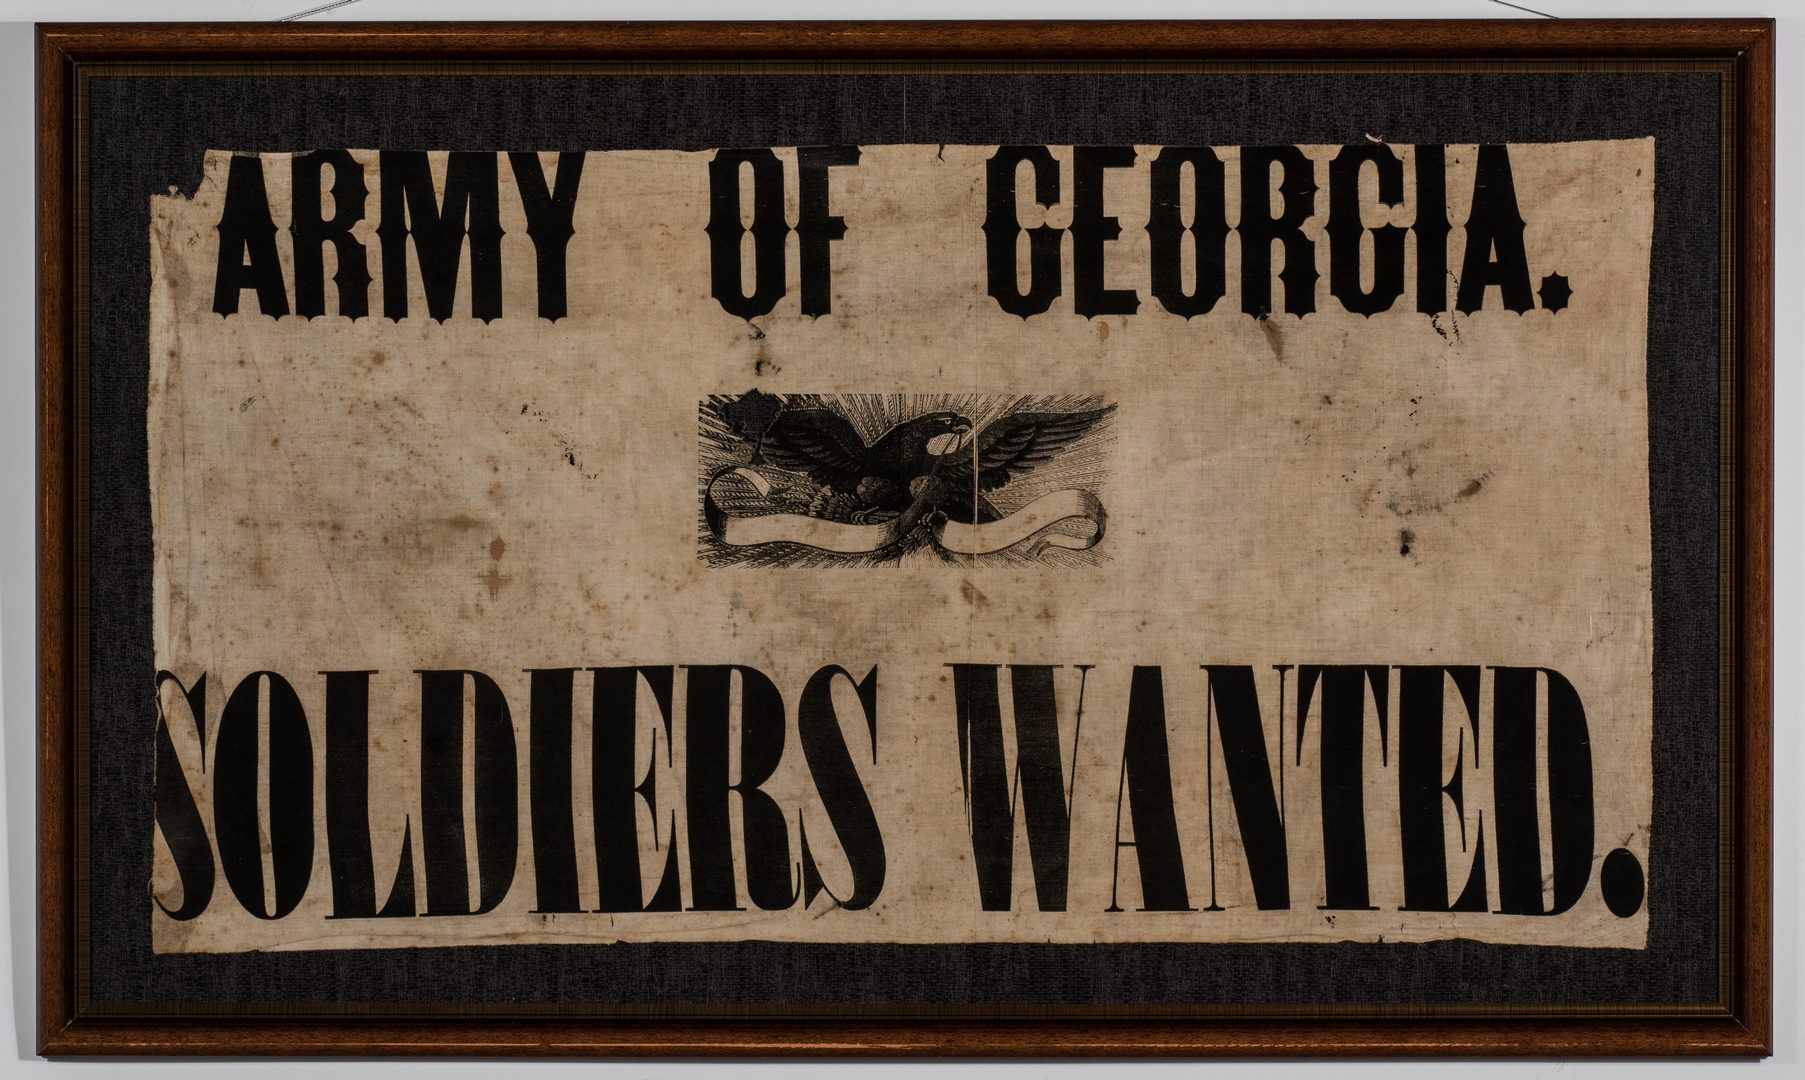 Lot 494: Army of GA Soldiers Wanted Banner, circa 1864